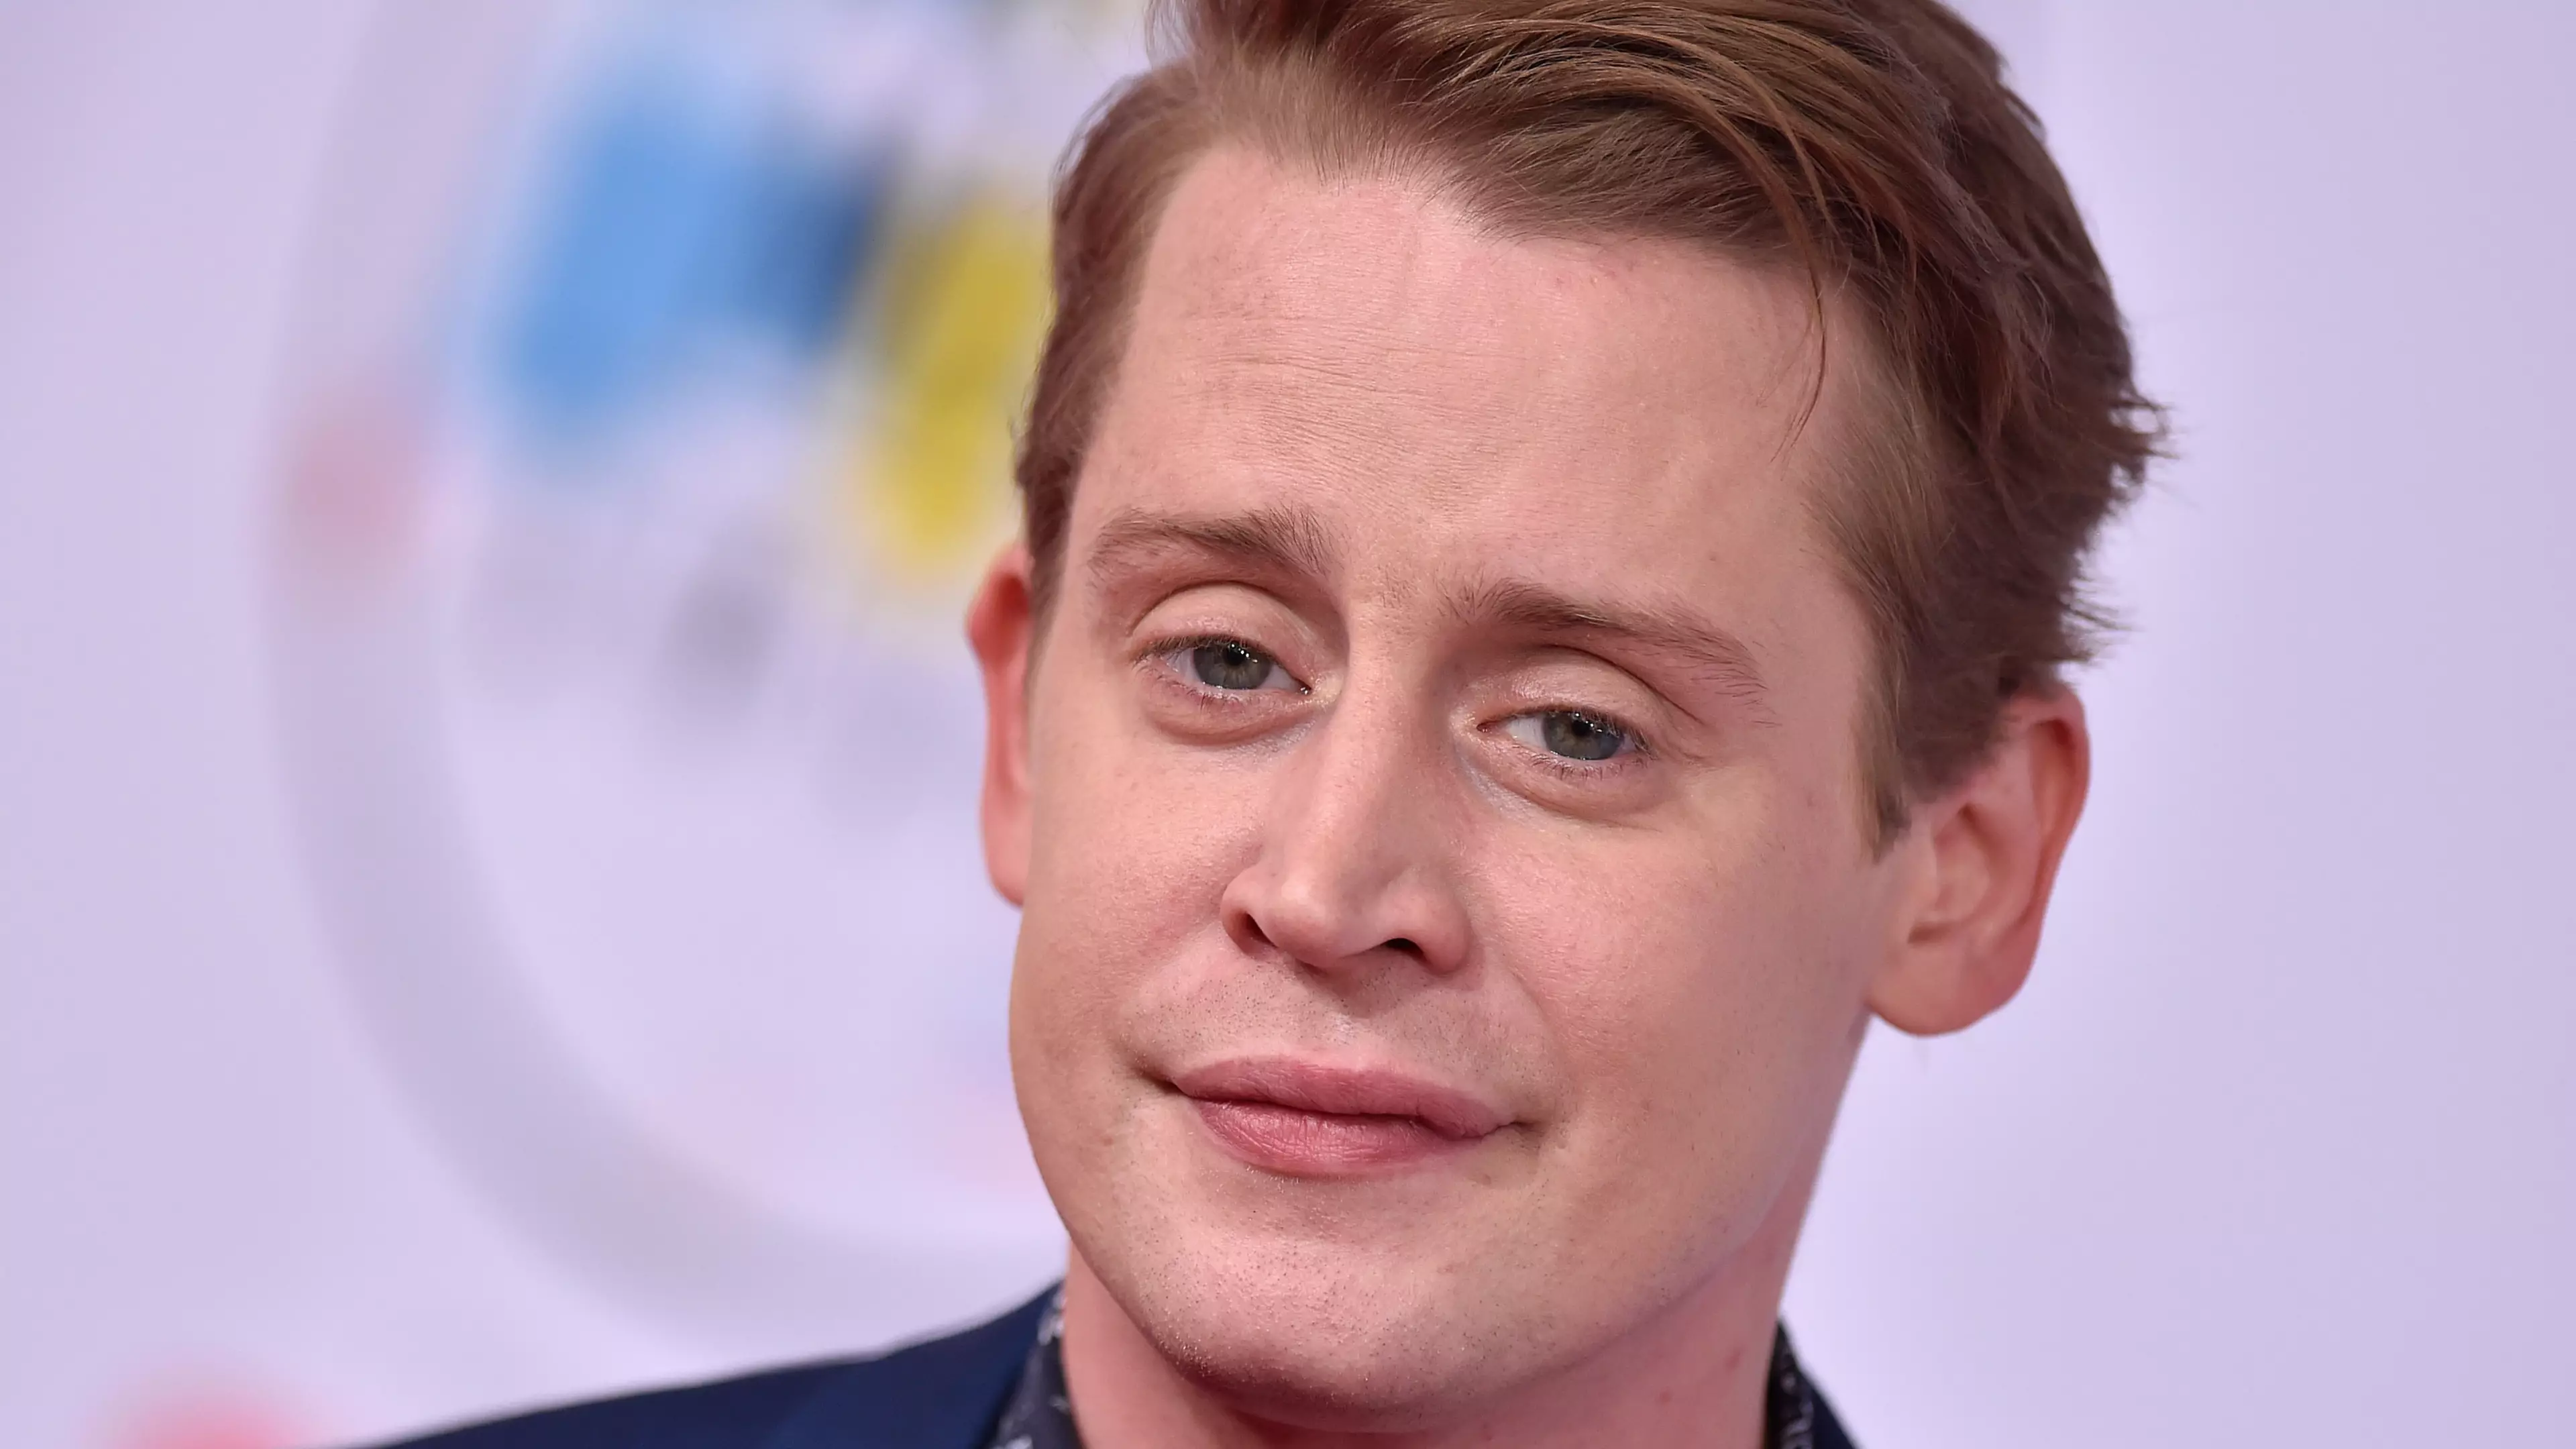 There's A Poignant Meaning Behind Macaulay Culkin's Newborn Baby's Name